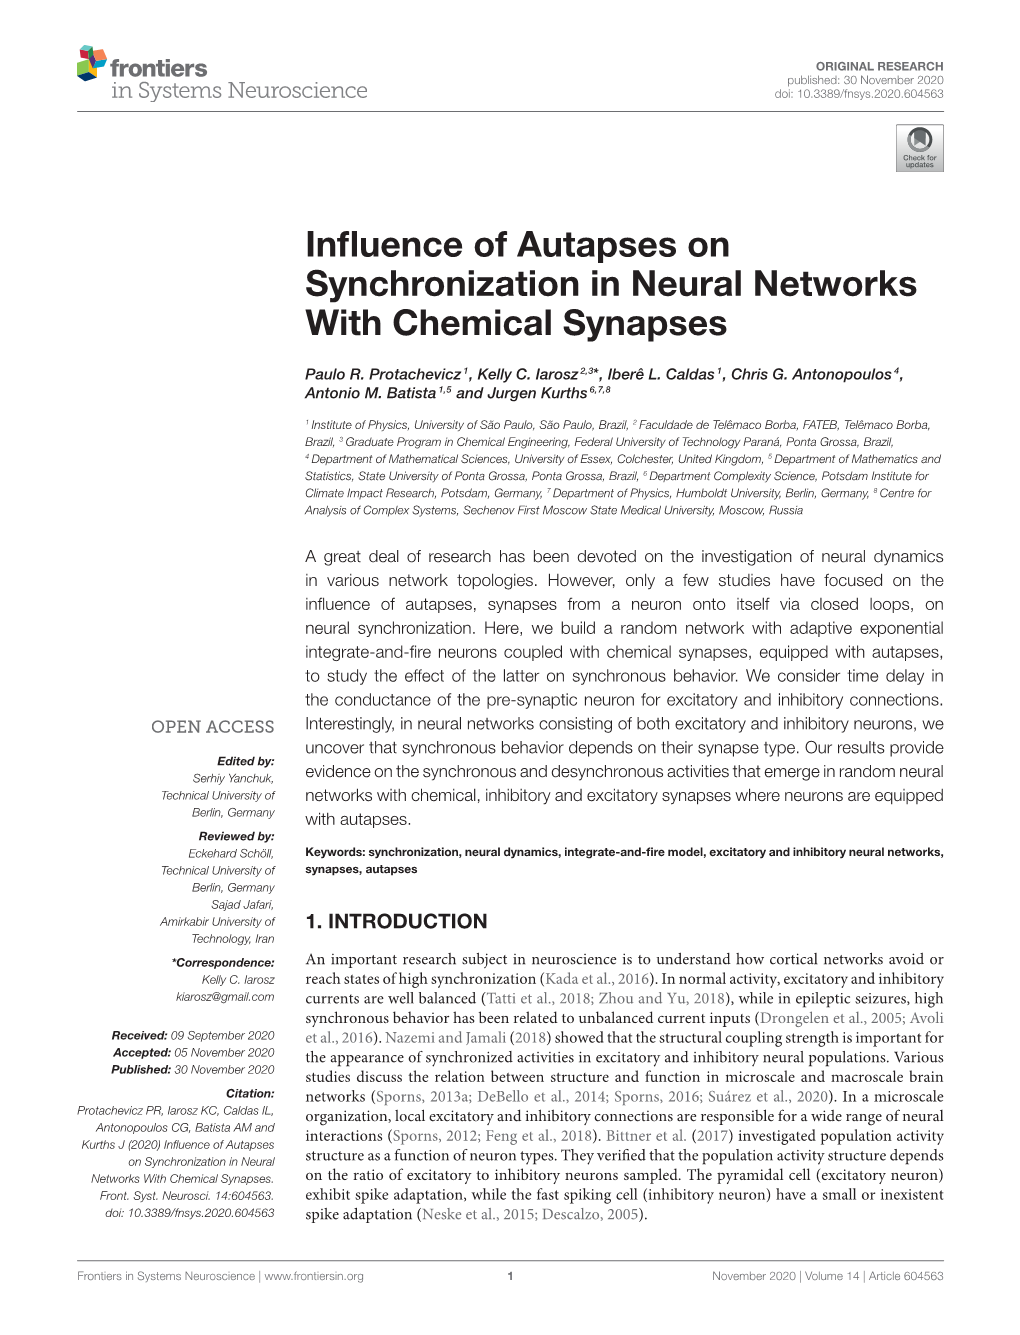 Influence of Autapses on Synchronization in Neural Networks